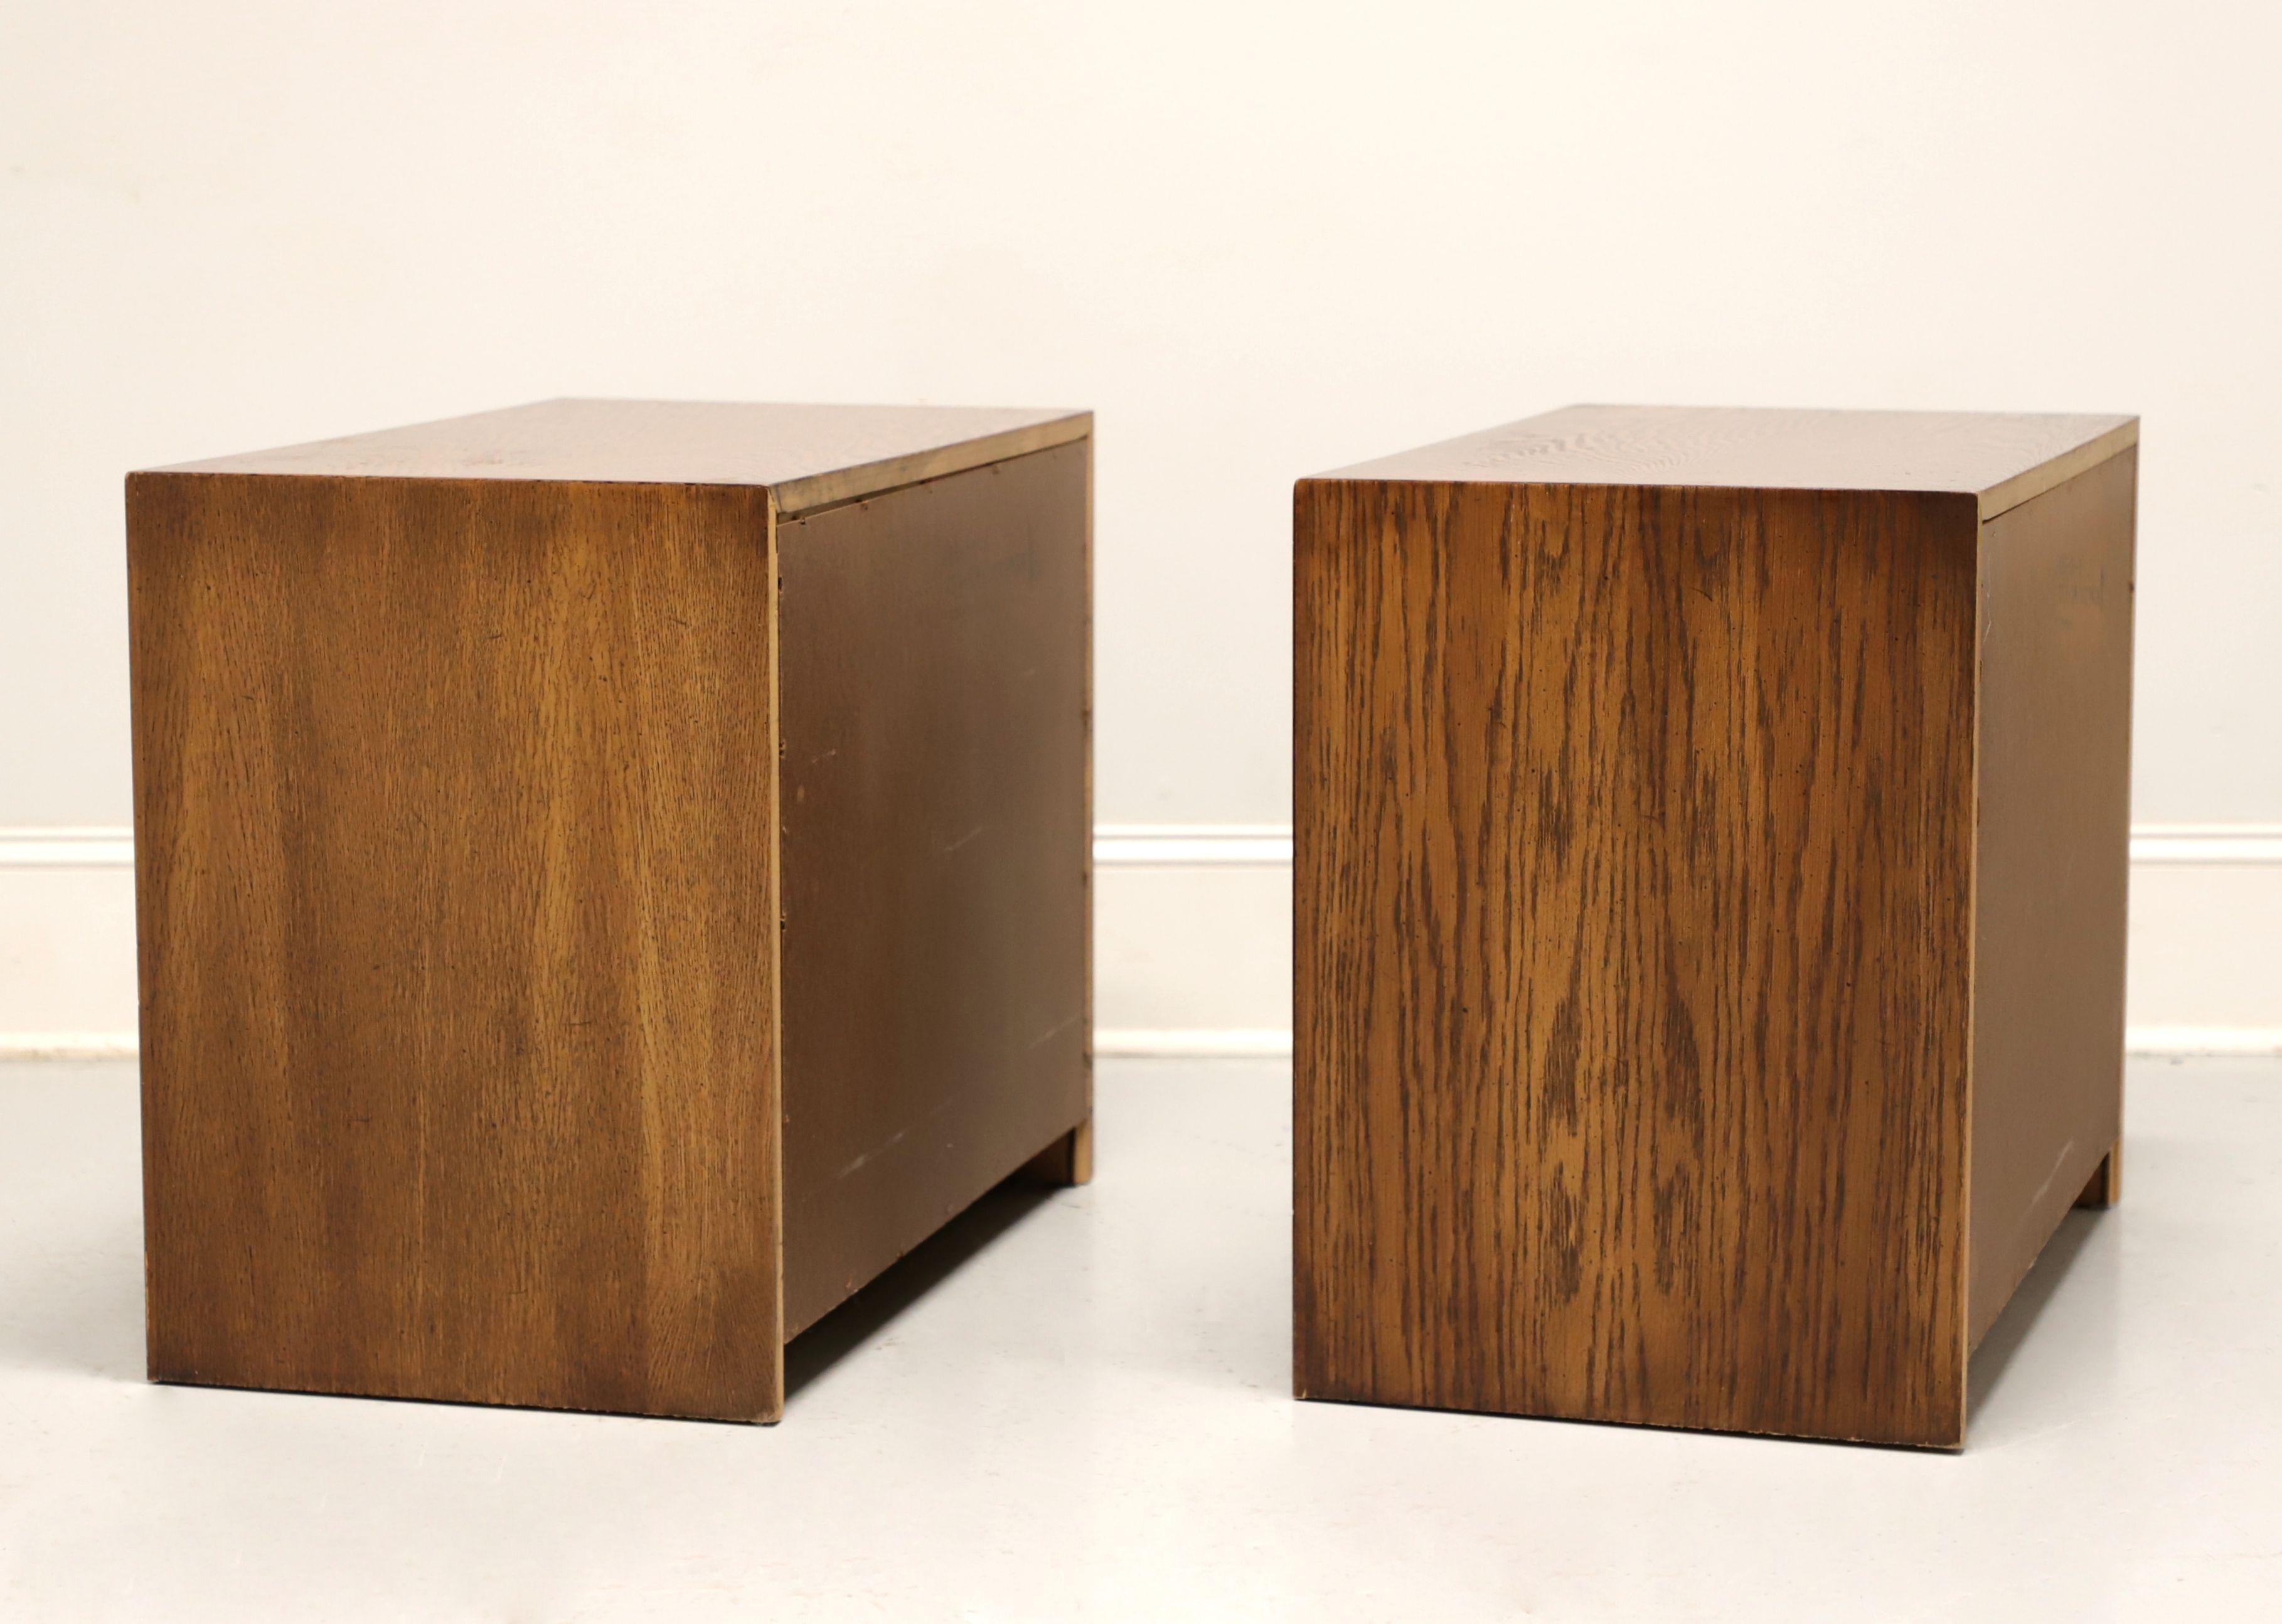 A pair of Mid 20th Century Brutalist style Nightstands by Lane Furniture, from their Pueblo Collection. Oak with slightly distressed finish, intricately laid, highly textured, colorful geometric design to door fronts, inset oak panels to center of